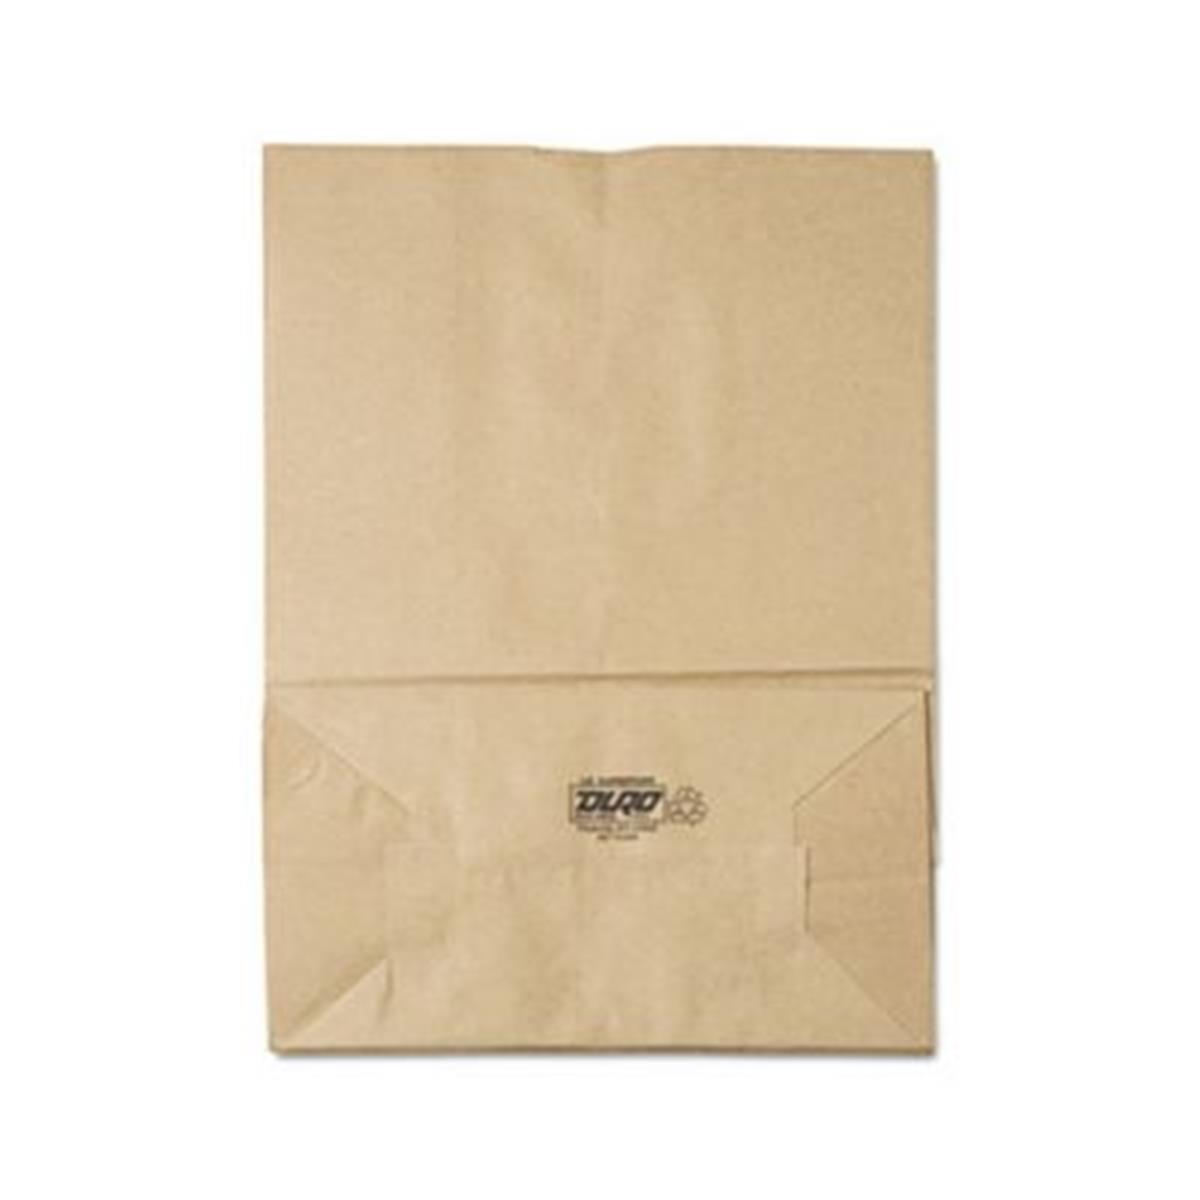 80080 Cpc 1-6 Bbl Kraft Paper Grocery Bag, 76 Lbs - Case Of 400